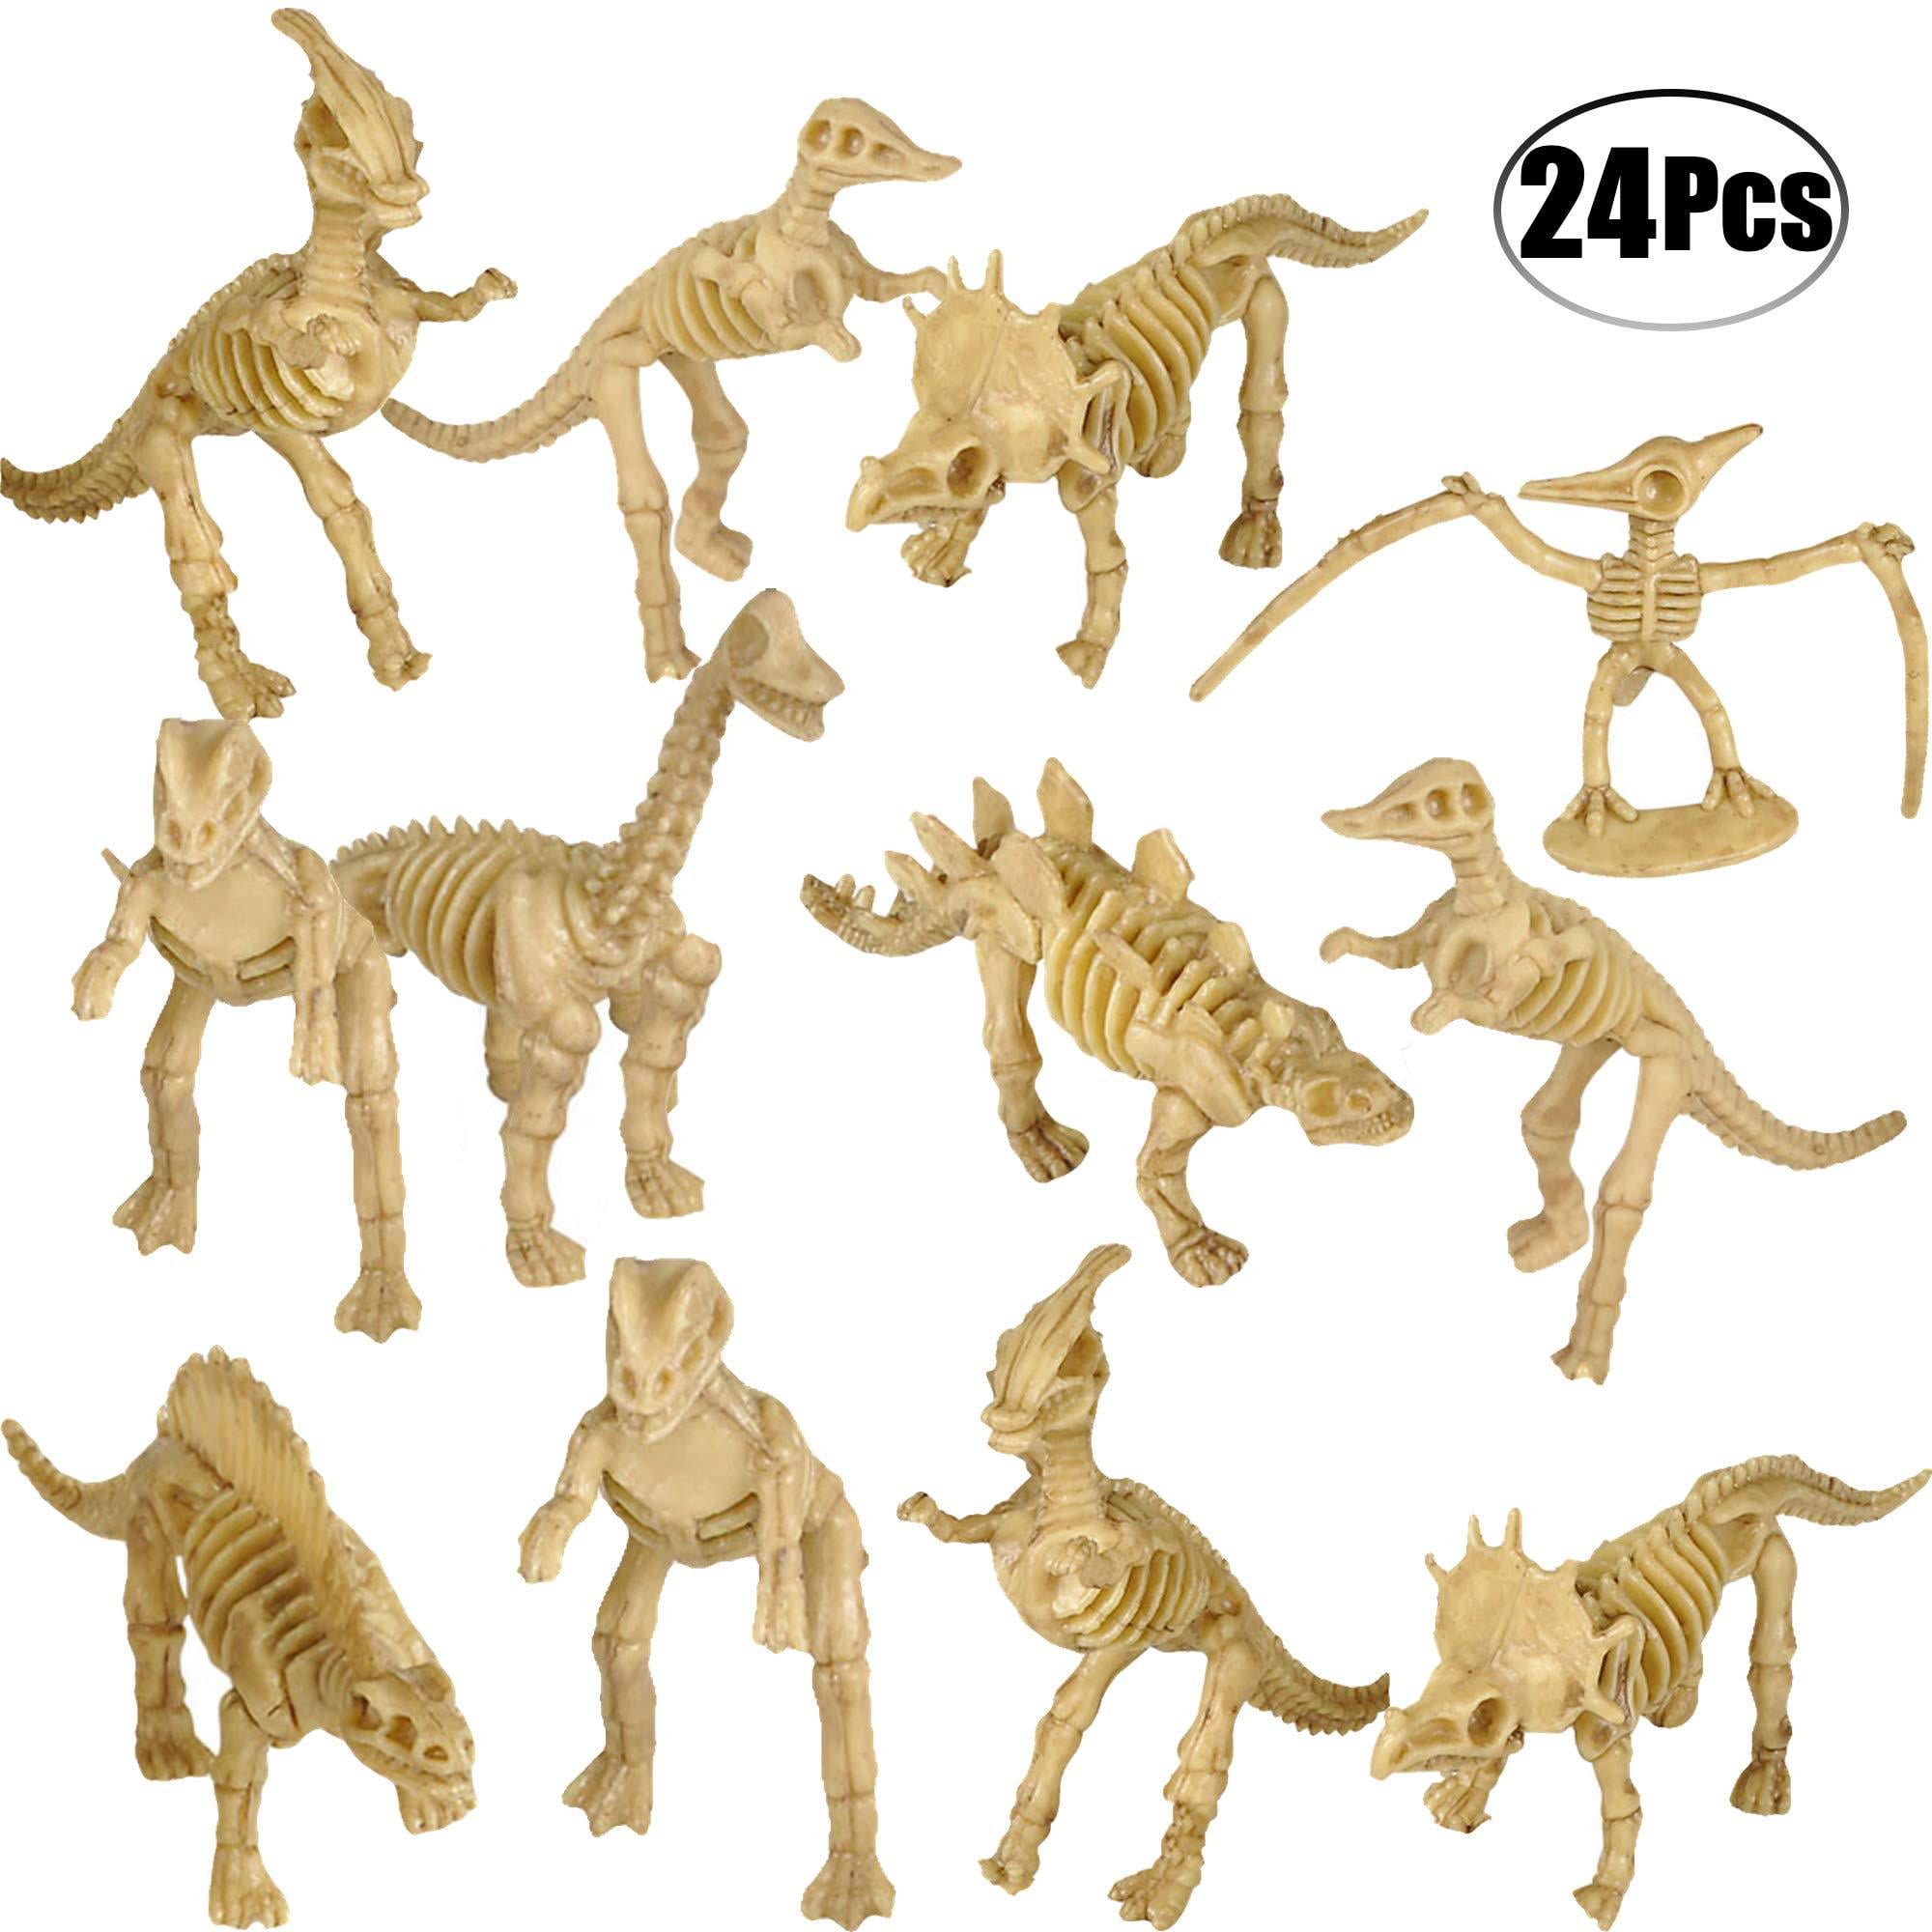 3.7 Inch Assorted Figures Dino Bones Dino Sand Dig Party Favor & Decorations. Educational Gift for Science Play 24pcs Dinosaur Fossil Skeletons 